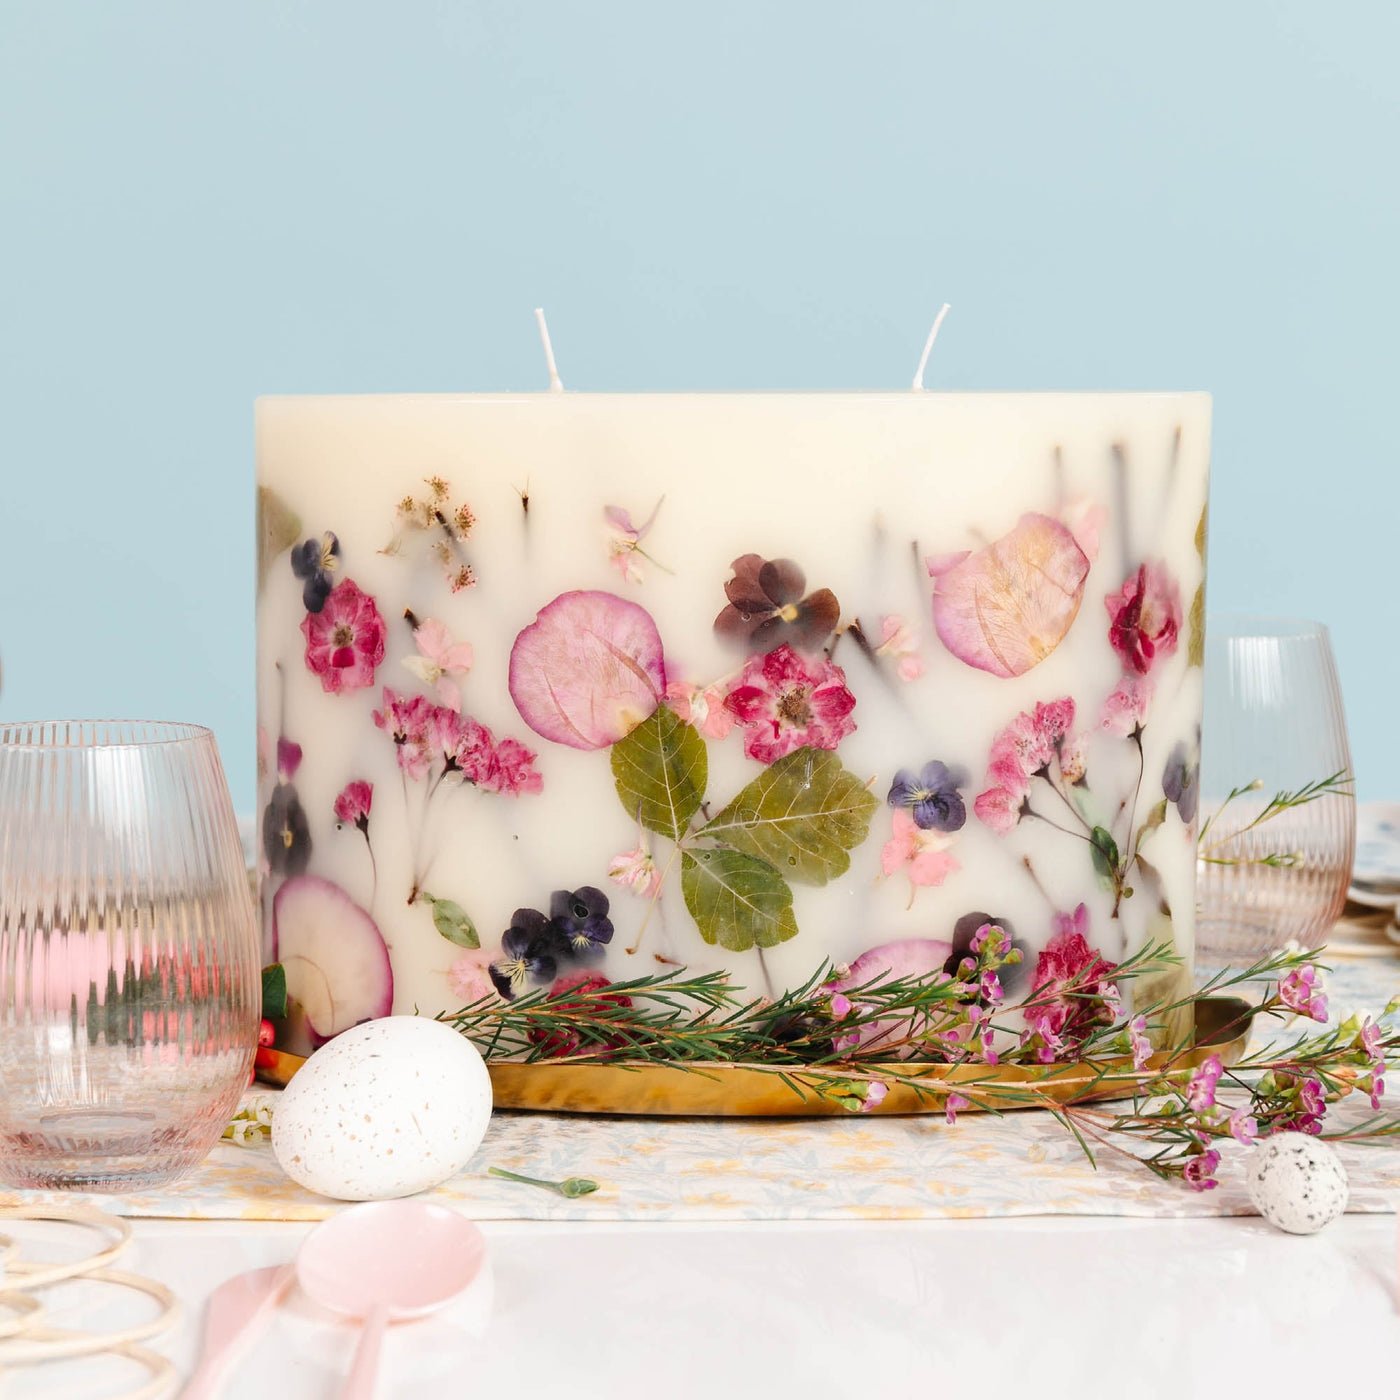 Rachel Parcell + Rosy Rings Peony Oval Botanical Candle Plate Set